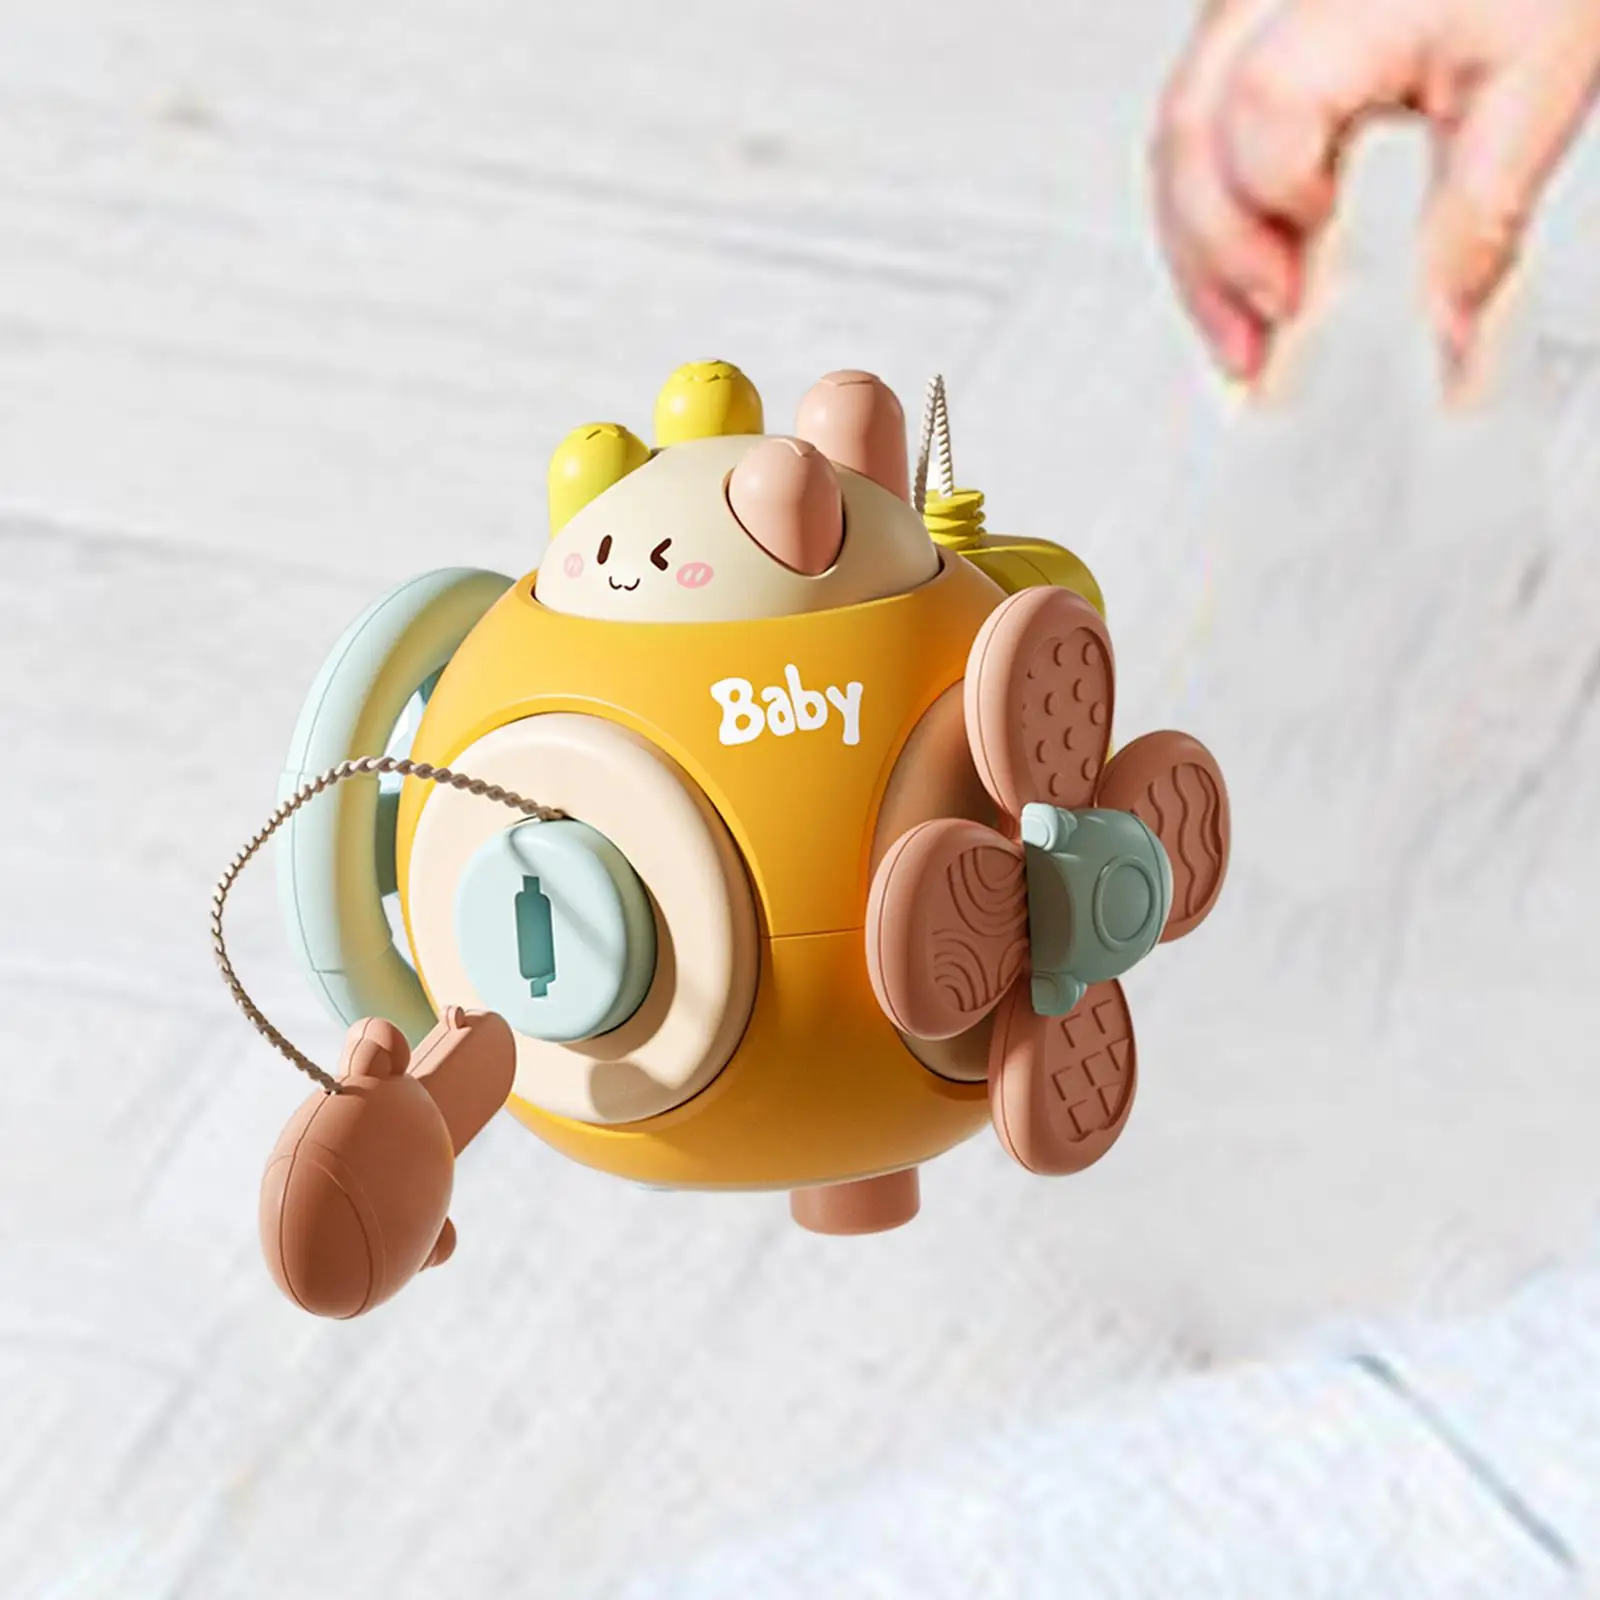 Busy Cube Activity Cube Developmental Baby Busy Ball for Fine Motor Skills Coordination Tactile Training Education Preschool